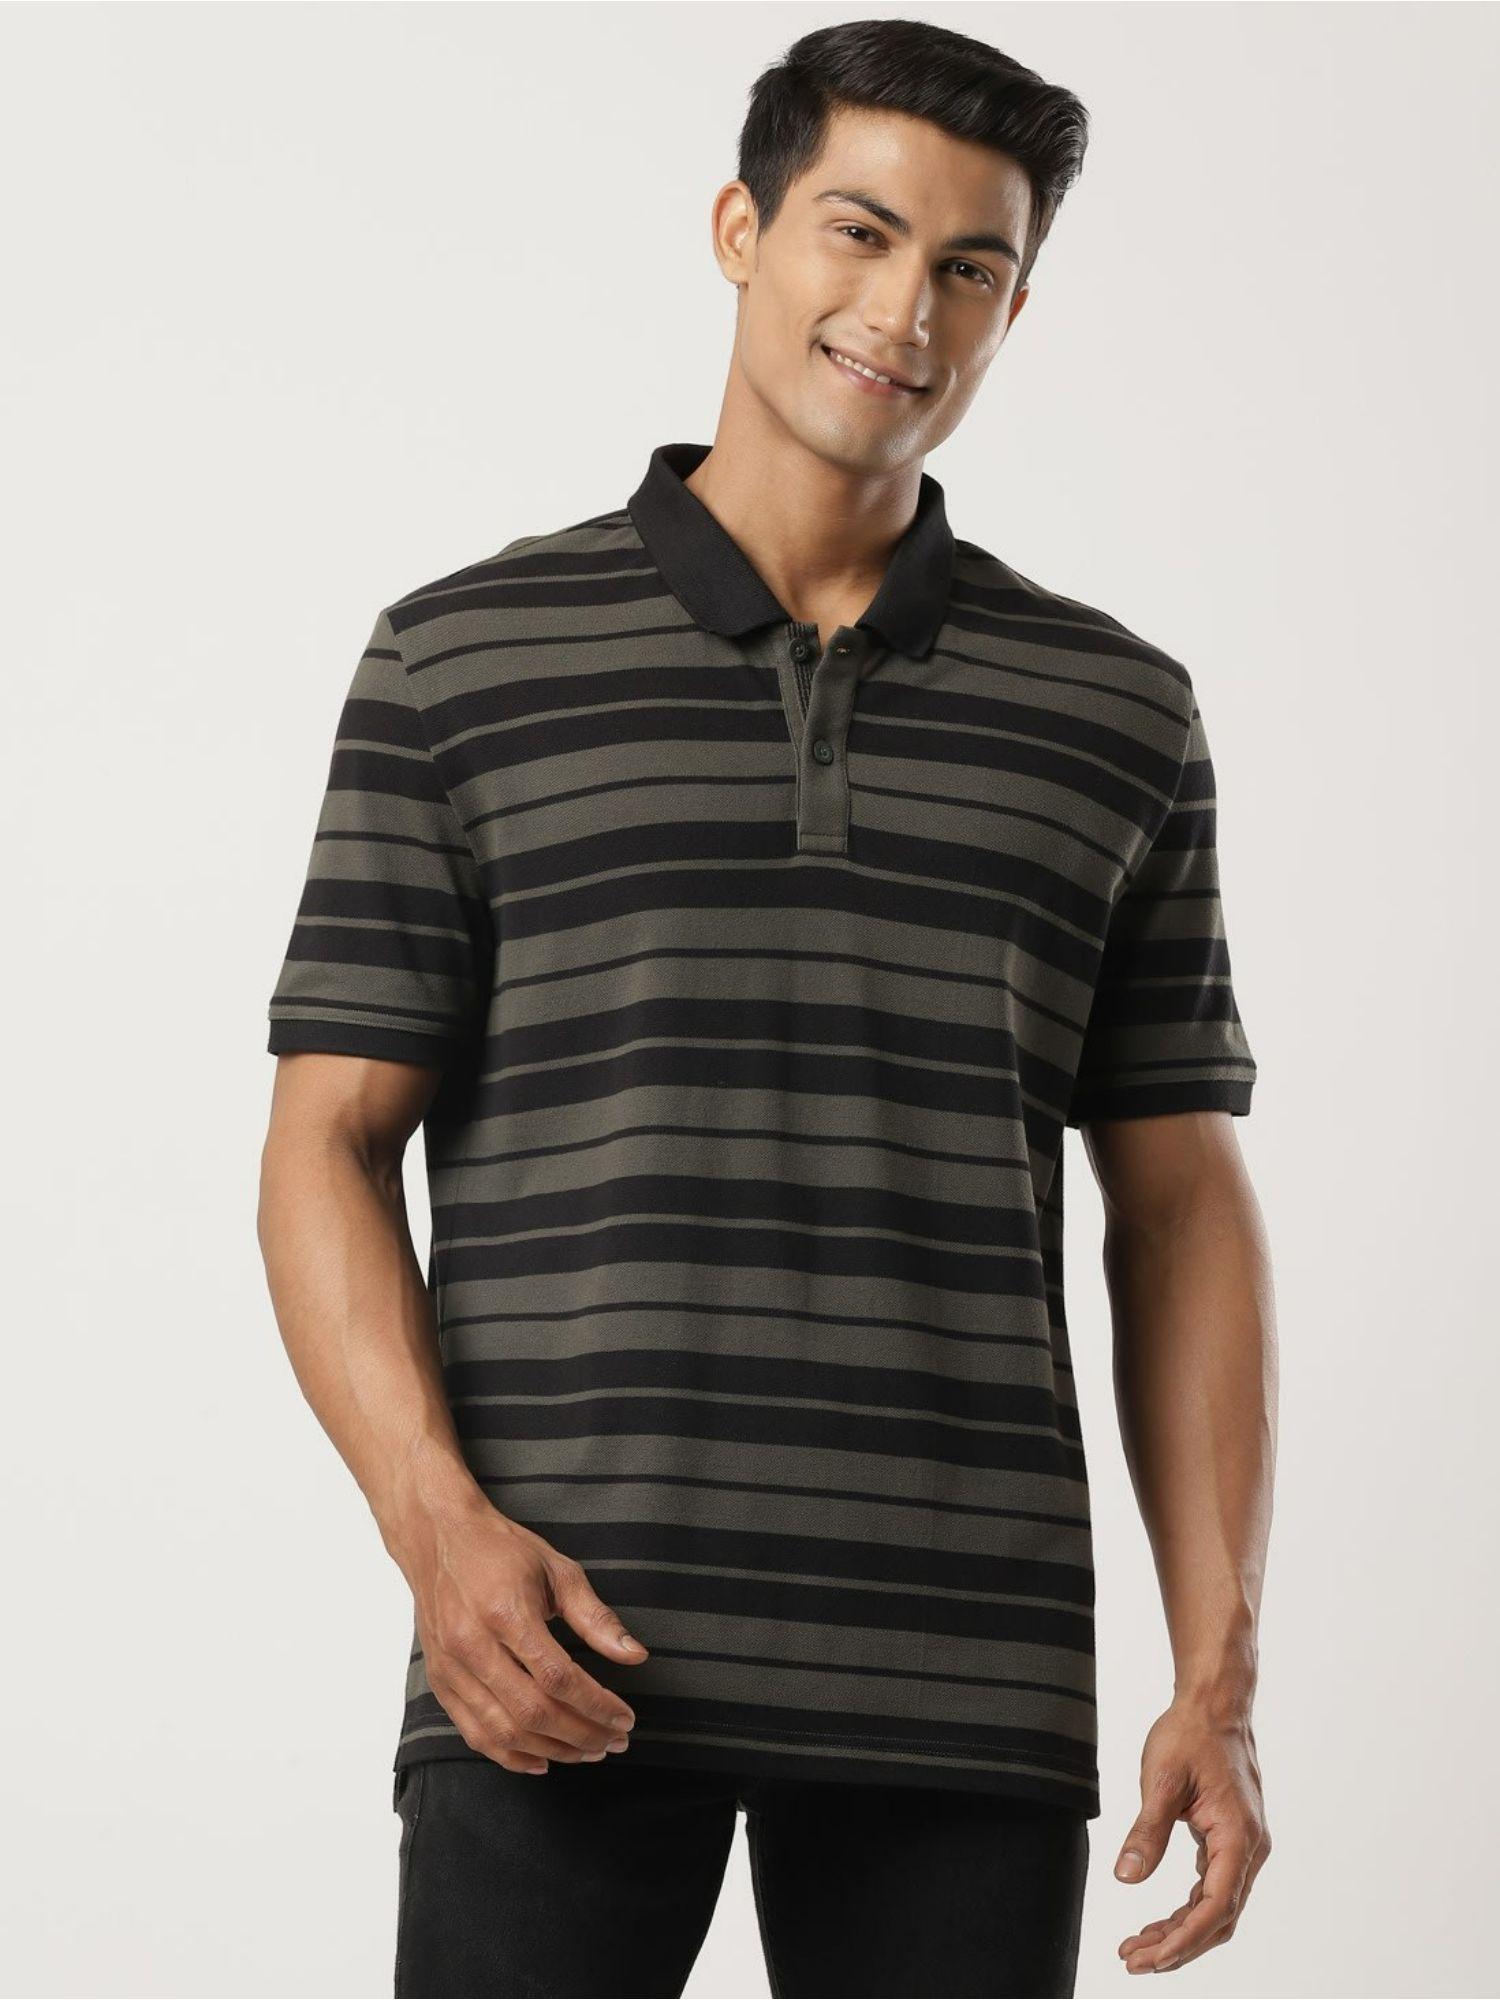 us93-mens-super-combed-cotton-rich-striped-half-sleeve-polo-t-shirt-black-&-deep-olive